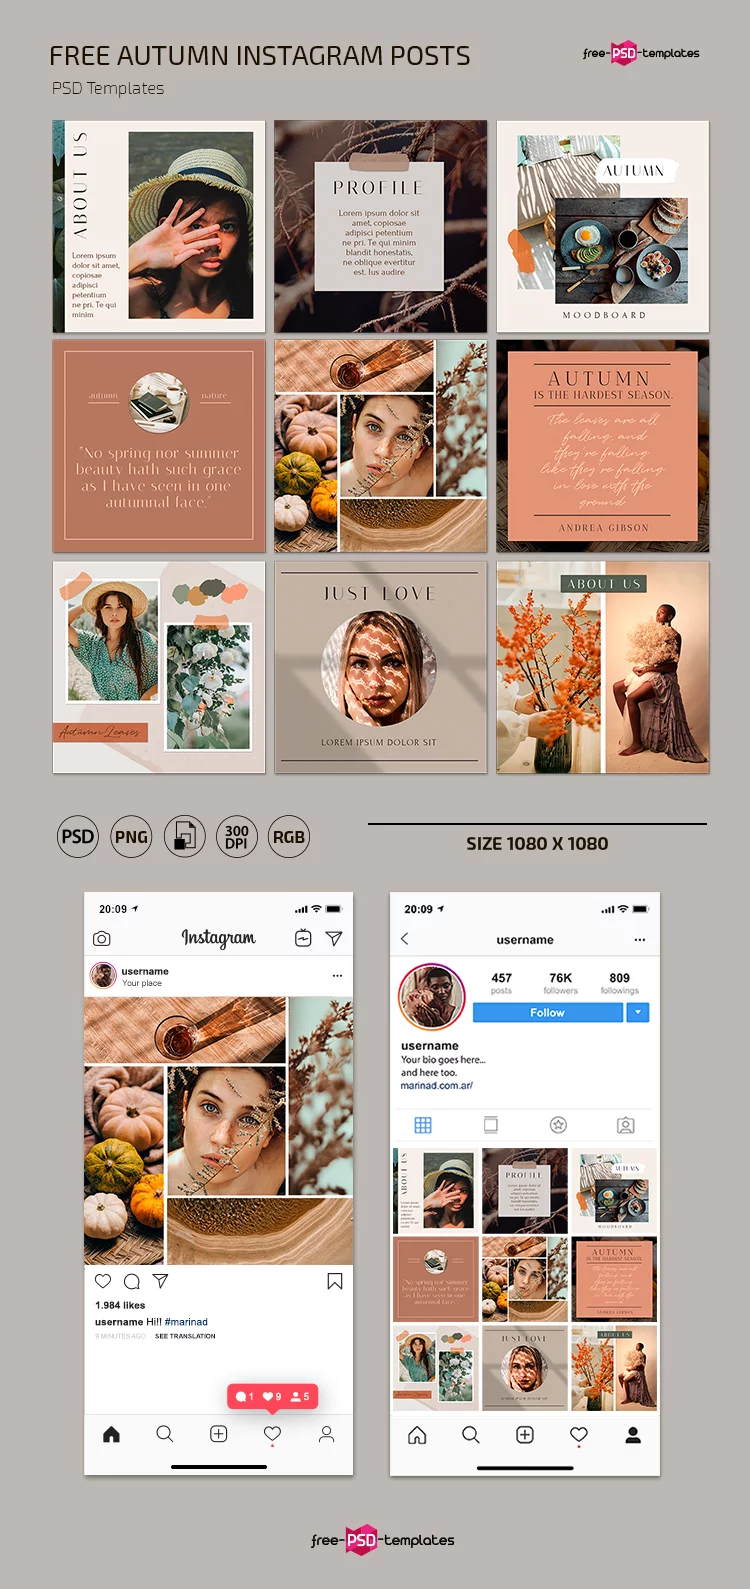 Free Autumn Mood Instagram Posts Template in PSD